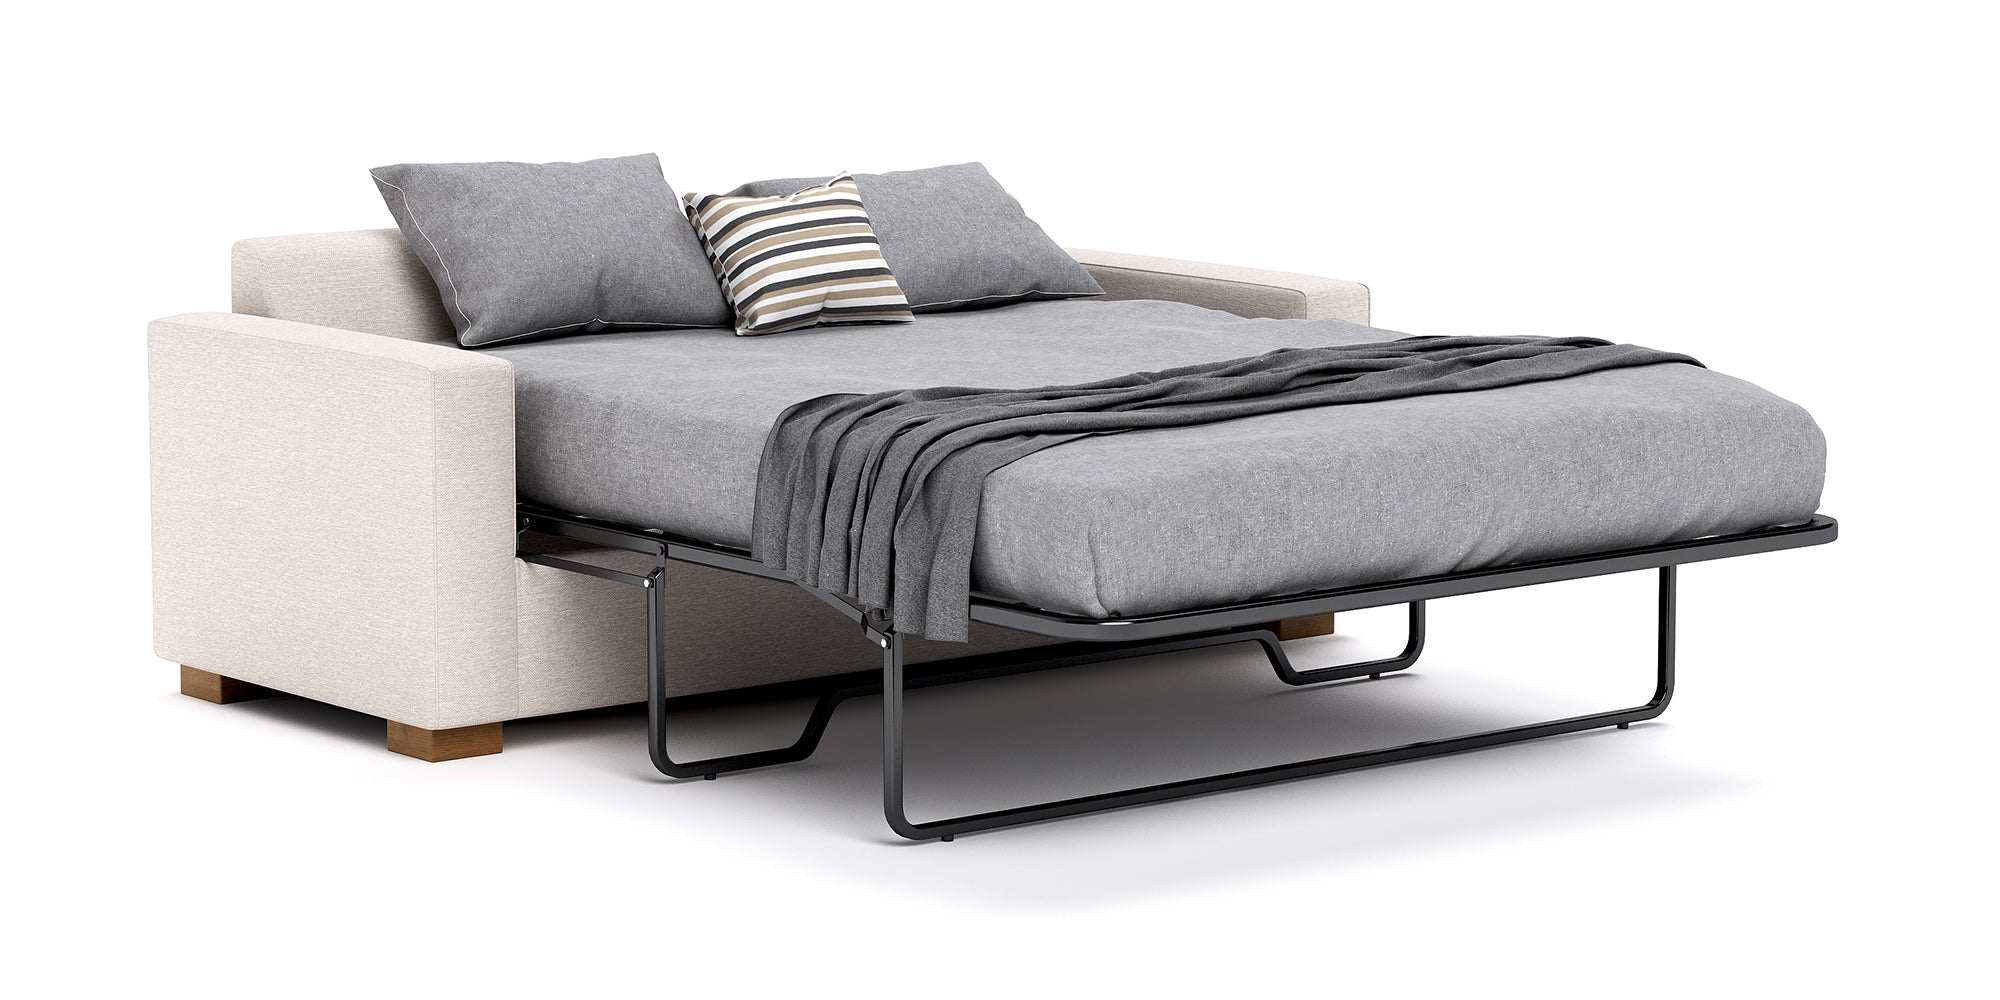 G: Rio Sofa Bed in Queen, shown here in Texture Oyster fabric and Dave Cafe legs.